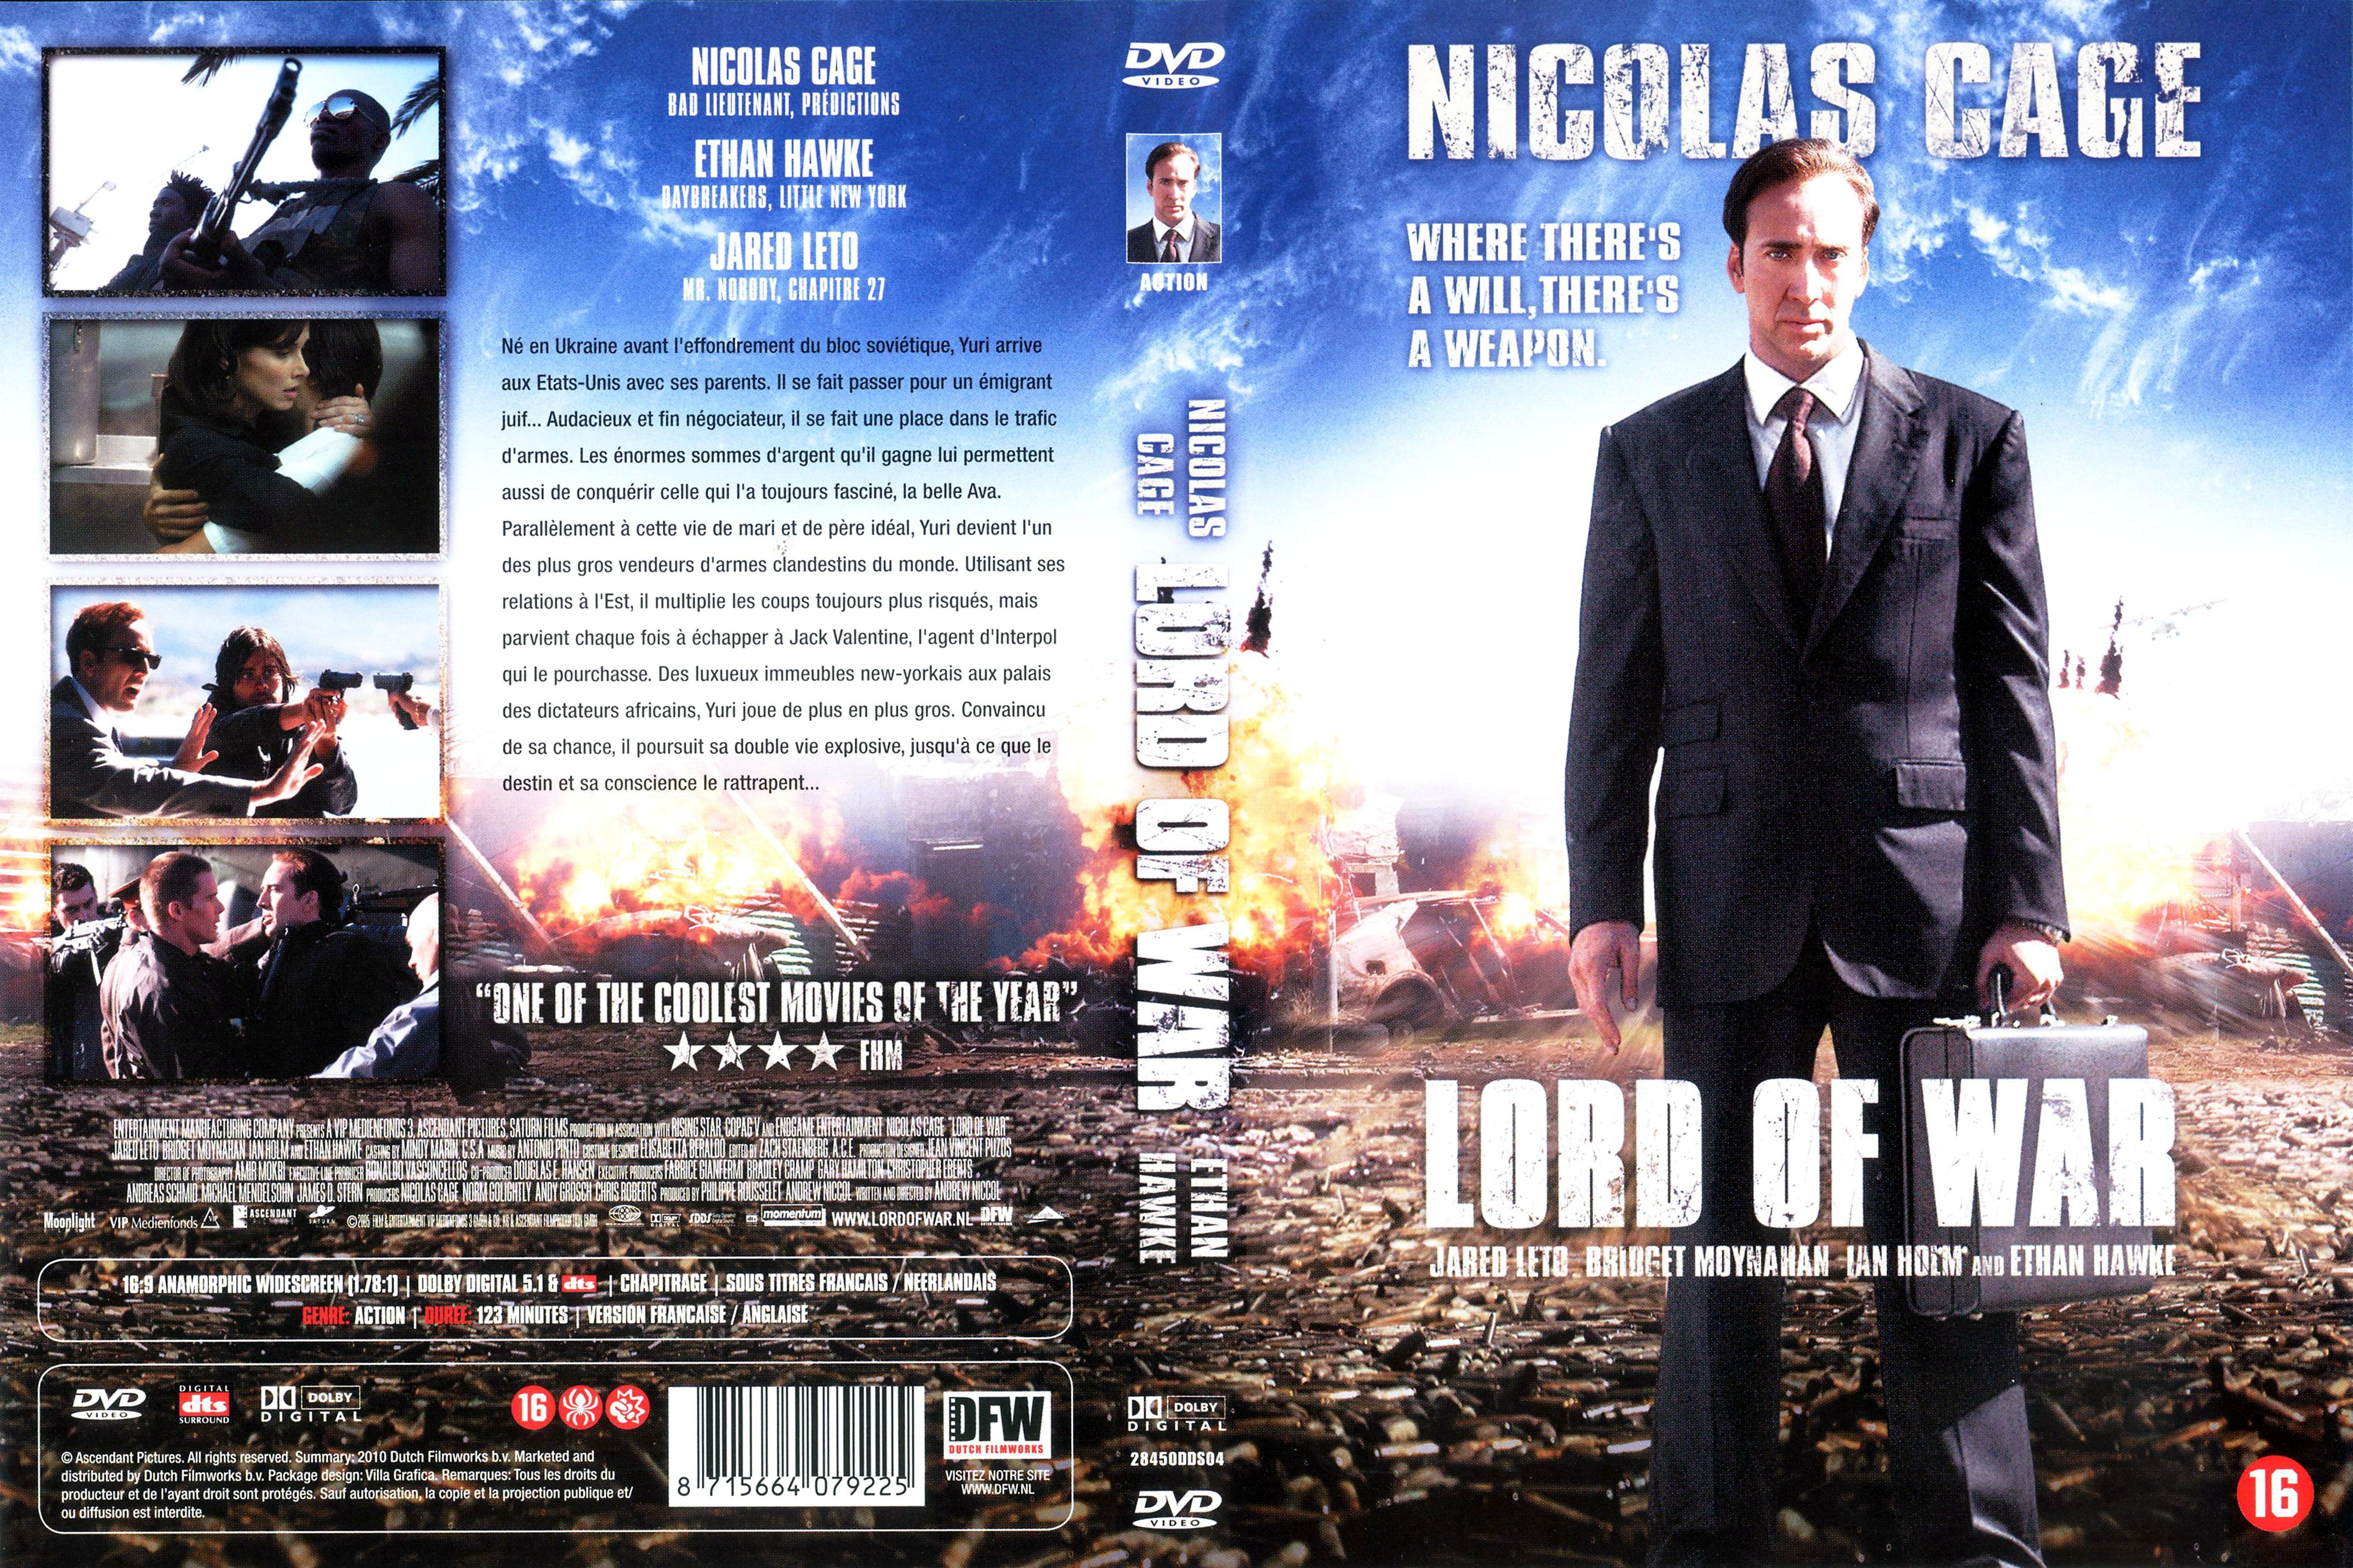 Jaquette DVD Lord of war v4